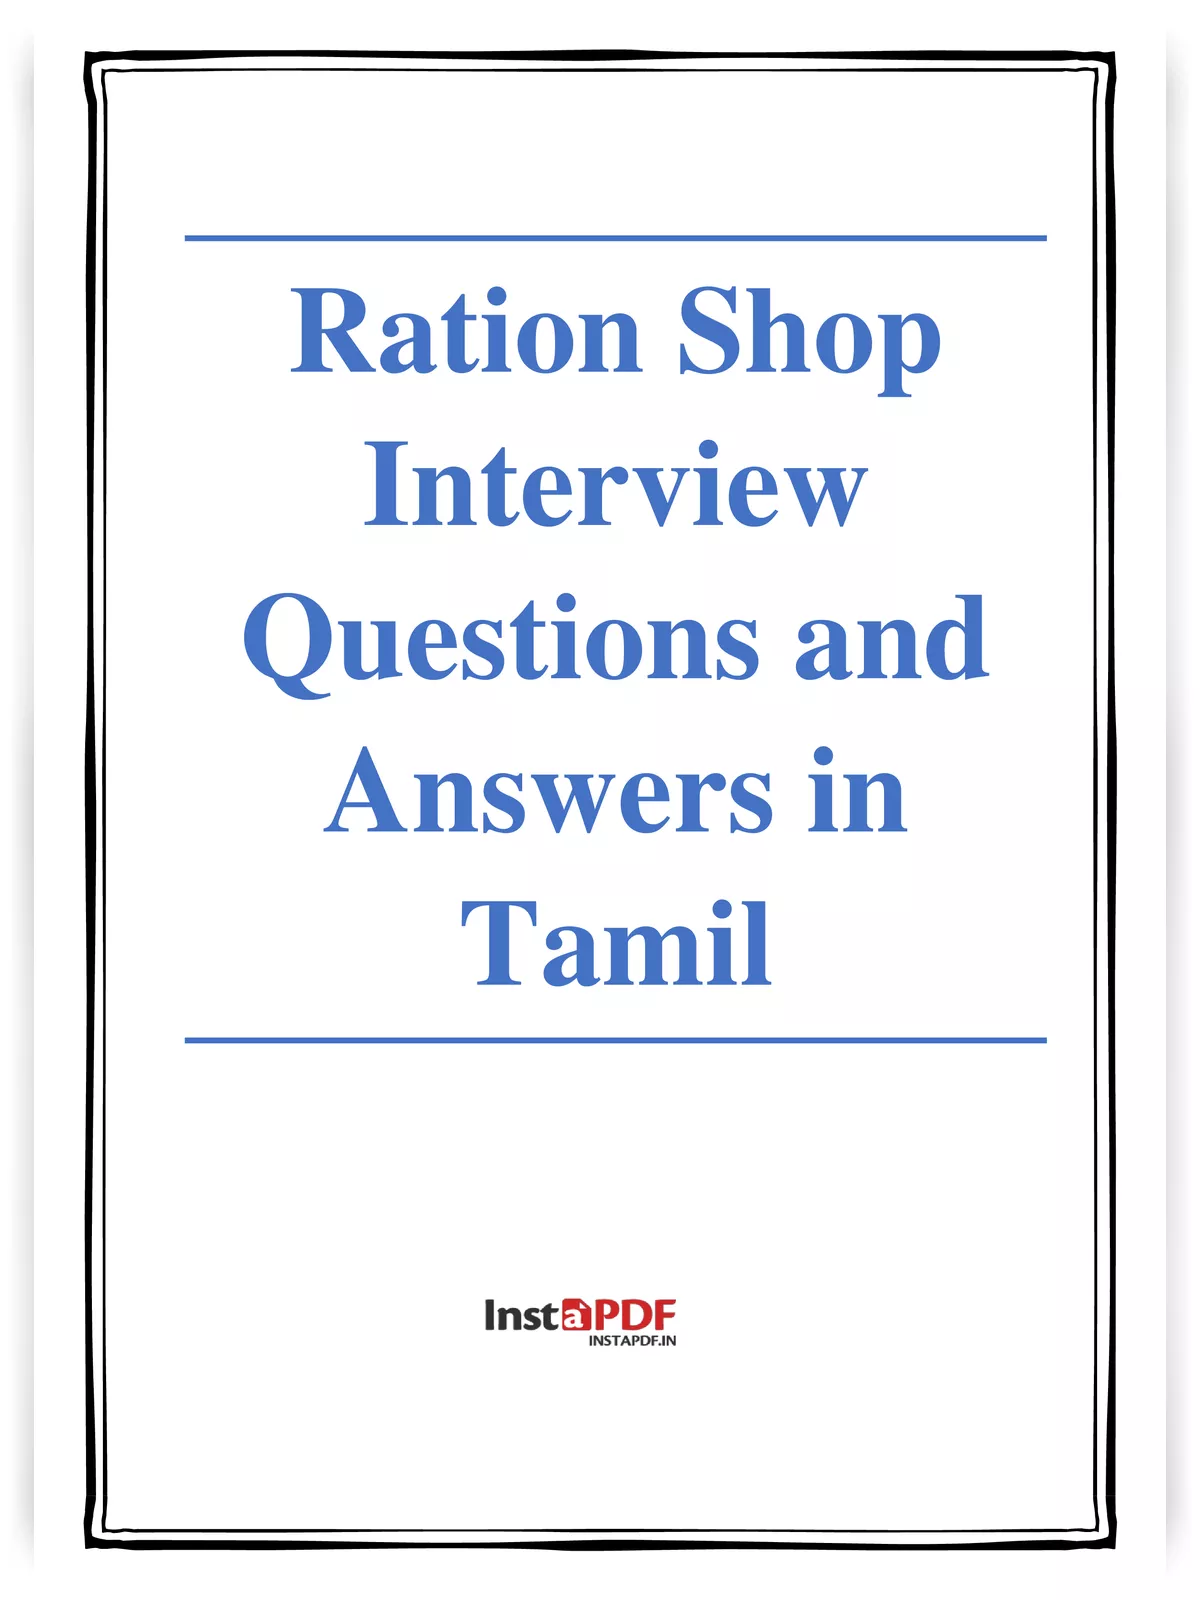 Ration Shop Interview Questions and Answers